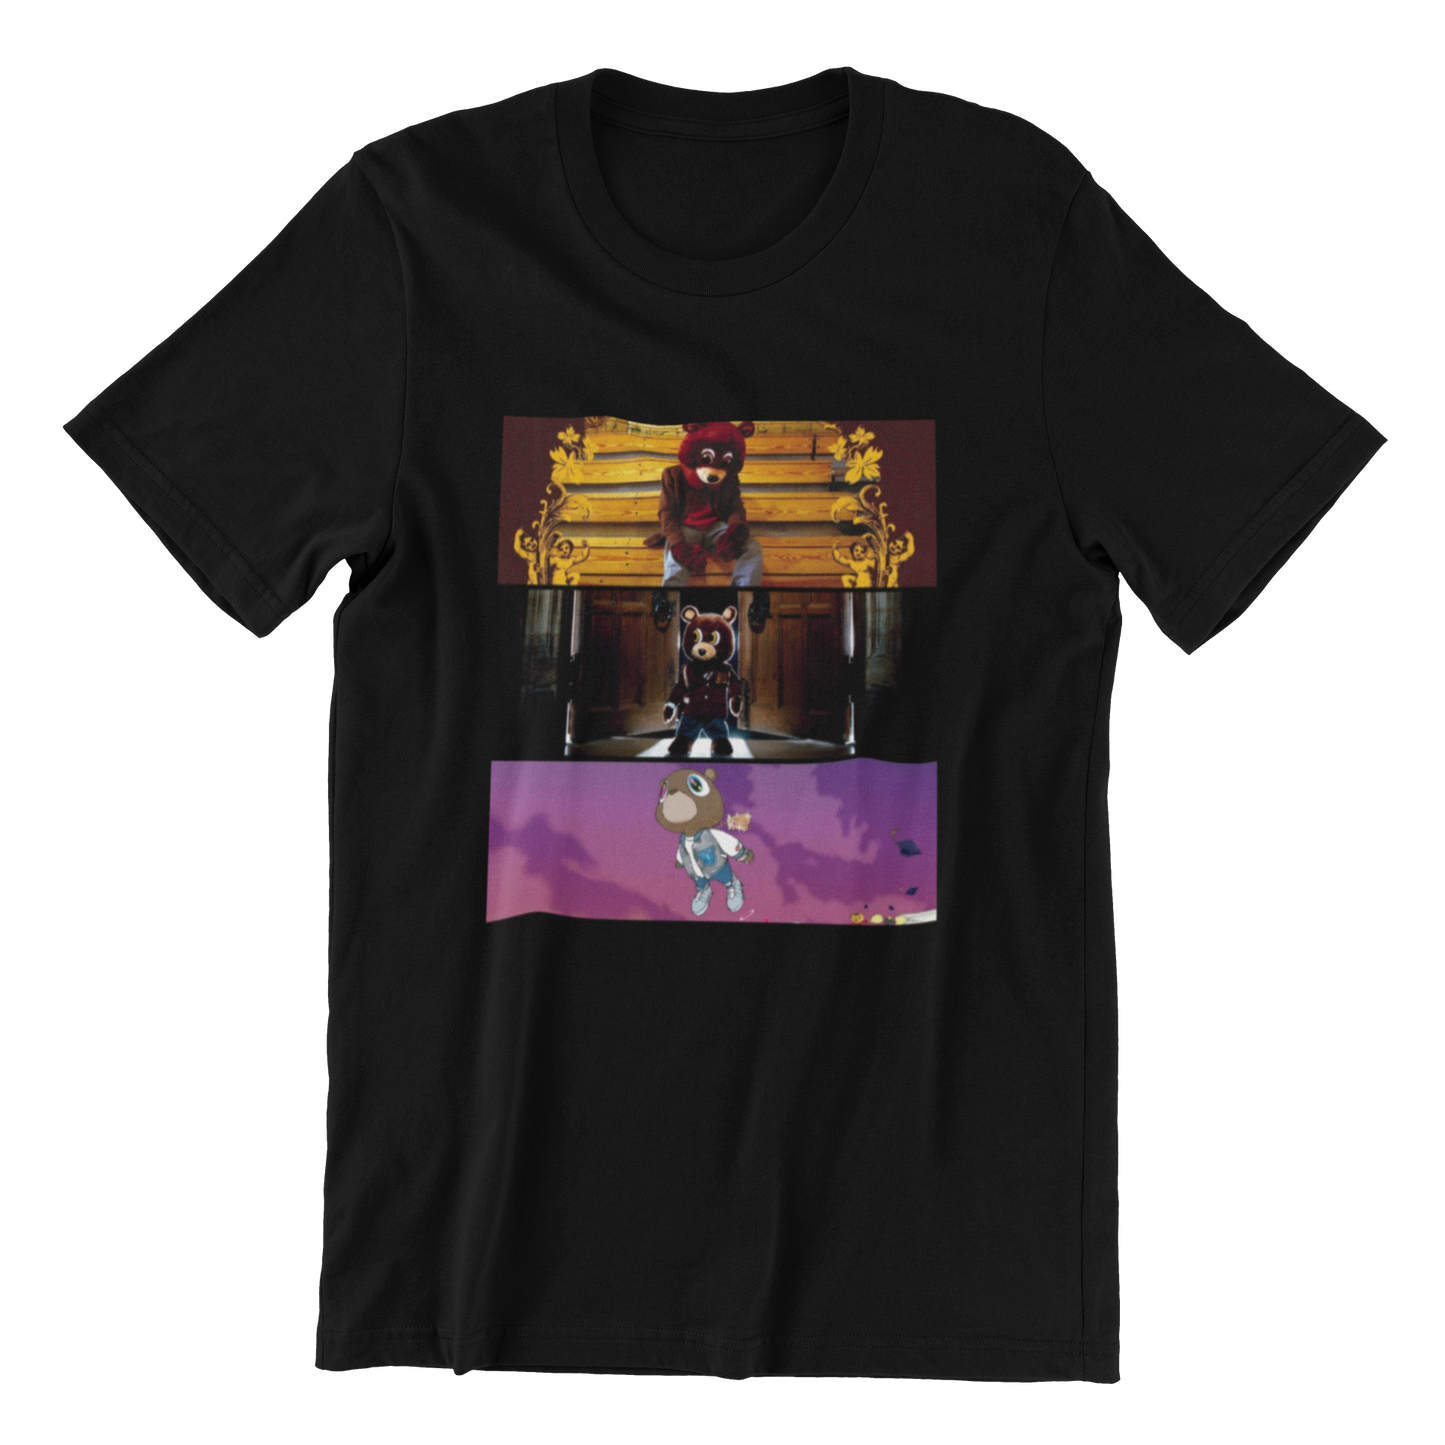 Kanye West, Version 1 (Album Cover Tee)